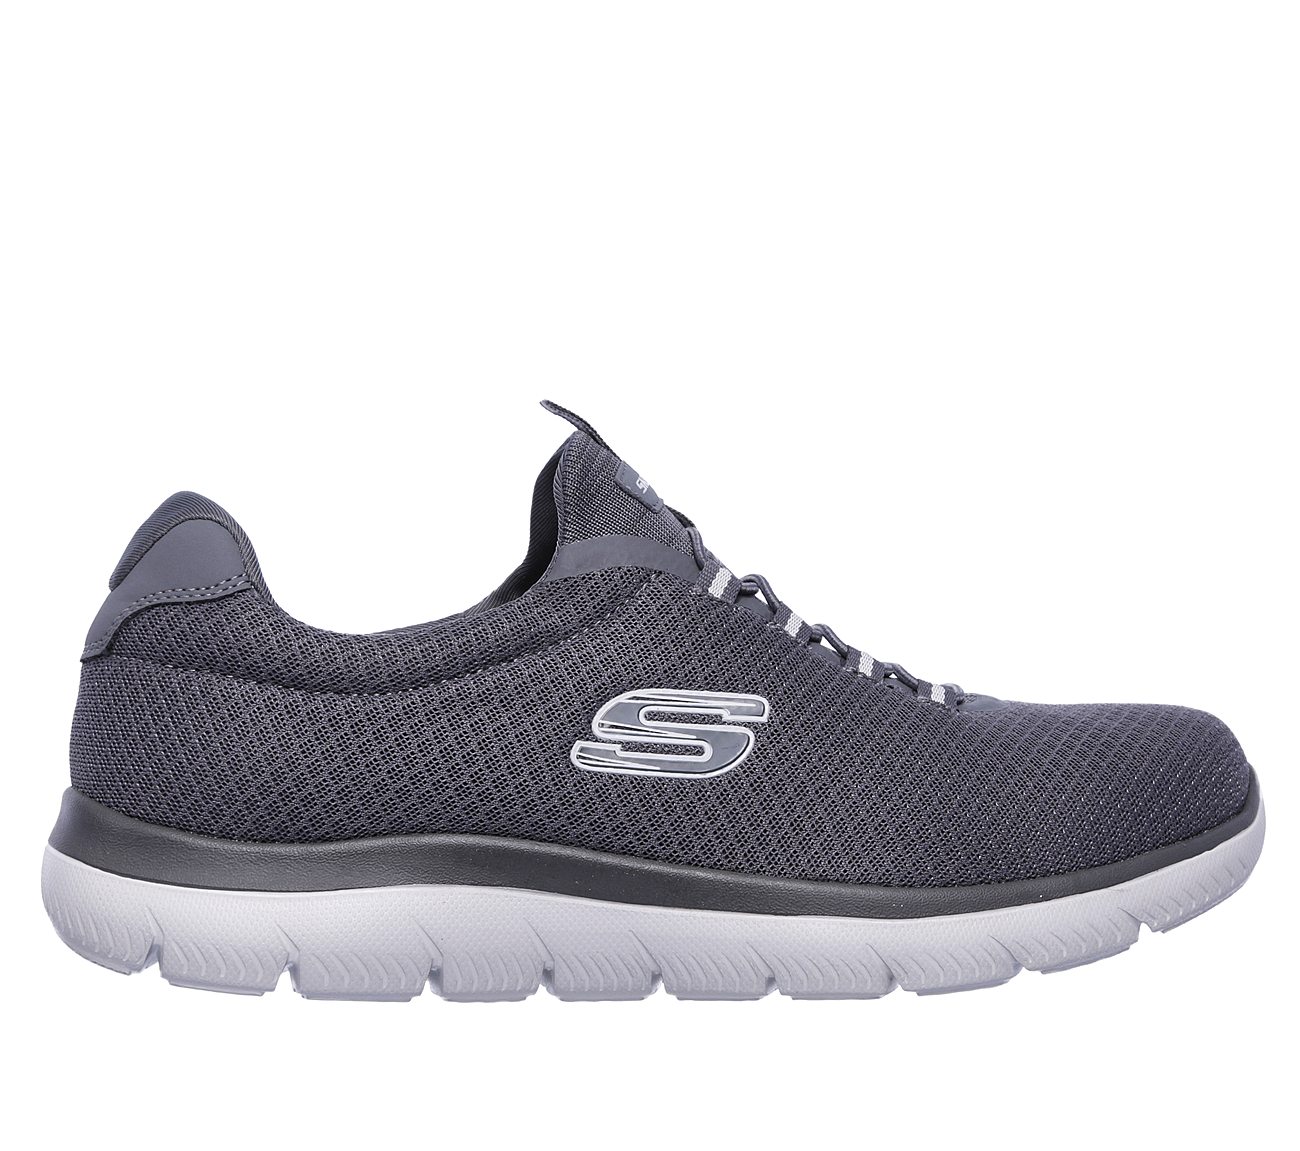 Buy SKECHERS Summits Sport Shoes only $55.00